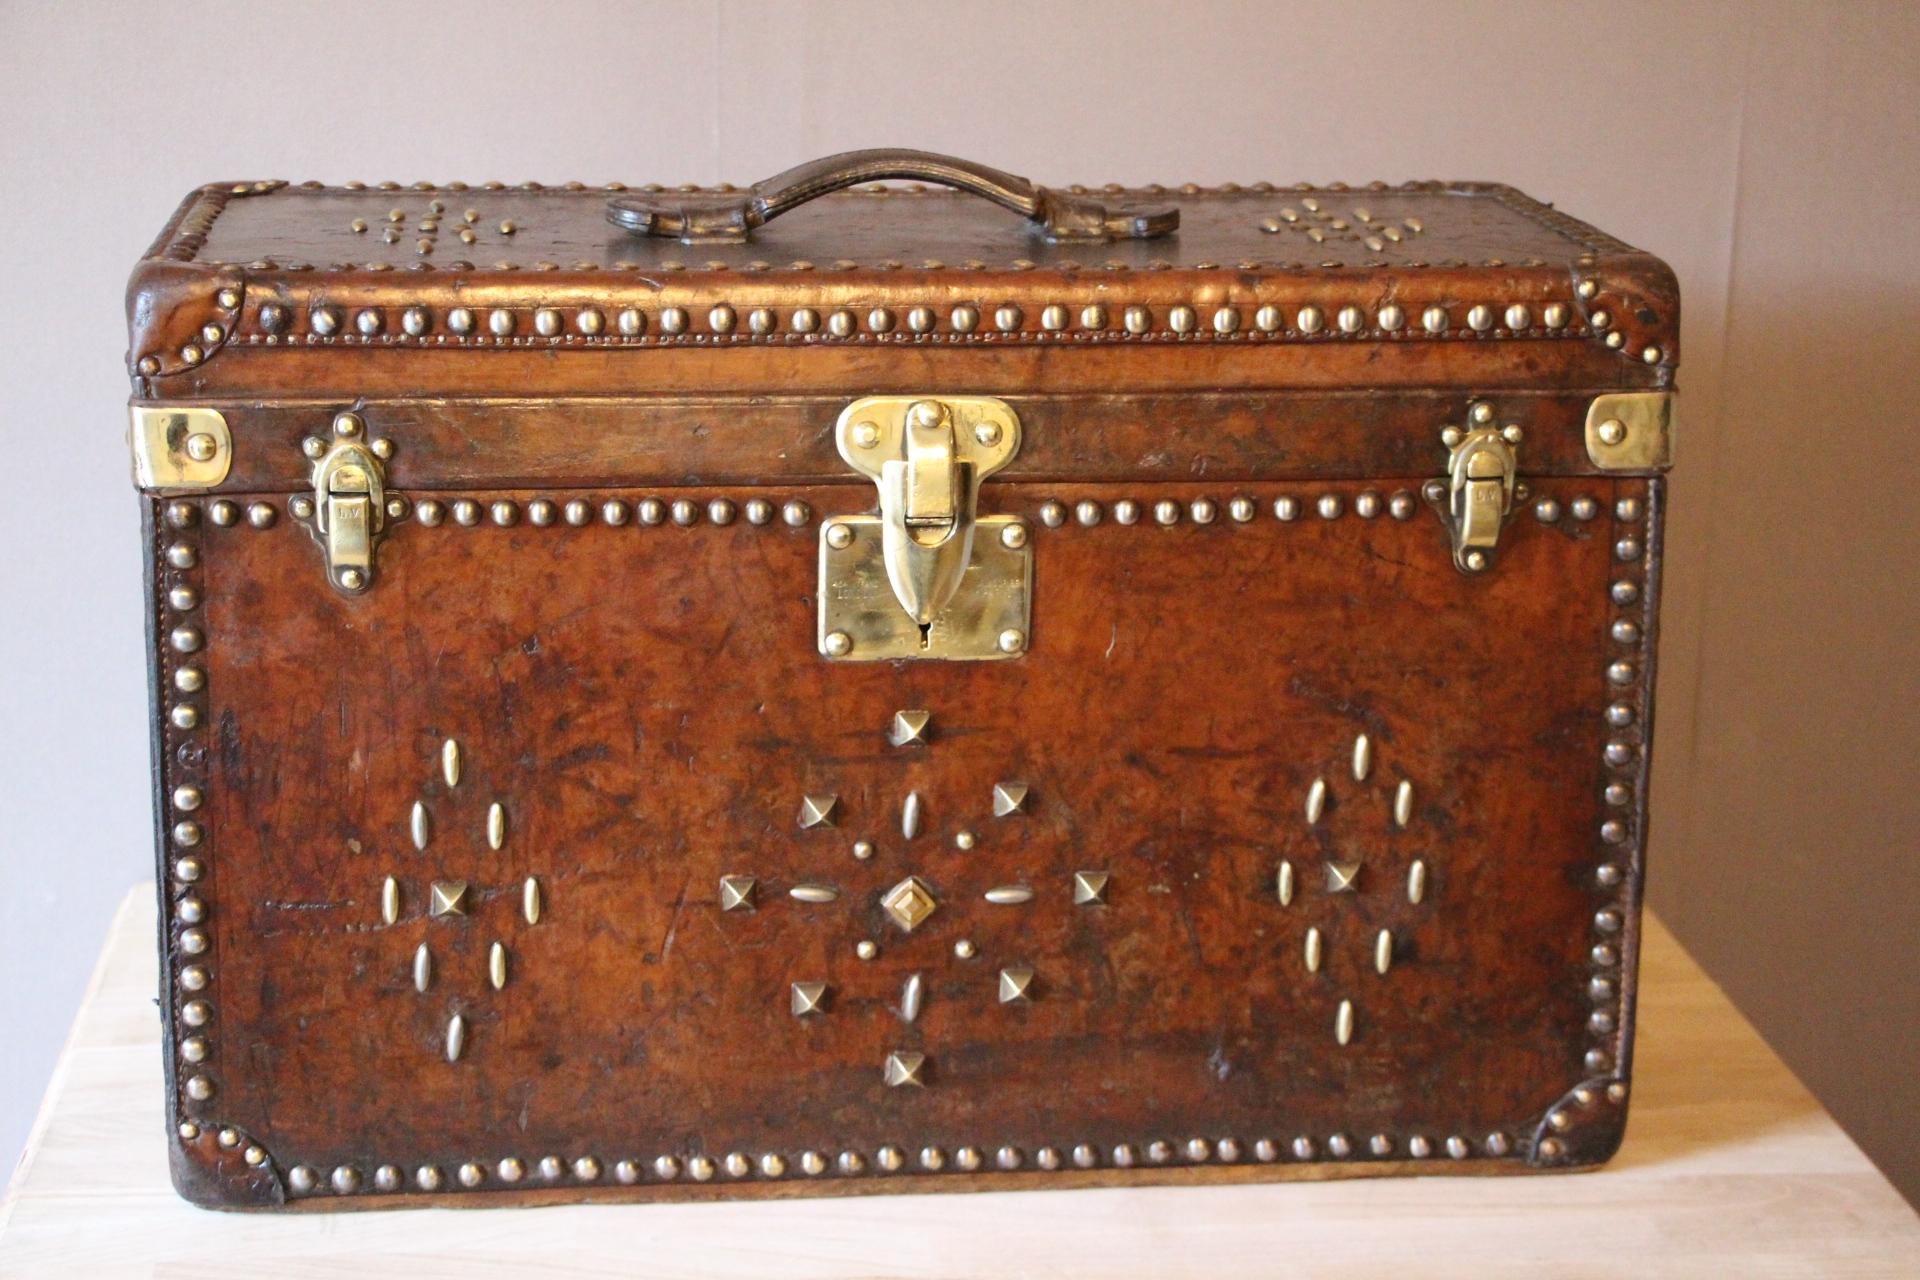 This Louis Vuitton trunk is very unusual by its dimensions and also due to the fact it is all leather. Leather has got a very nice and very warm patina. 
All solid brass Louis Vuitton stamped lock and clasps.
Design made with studs is not